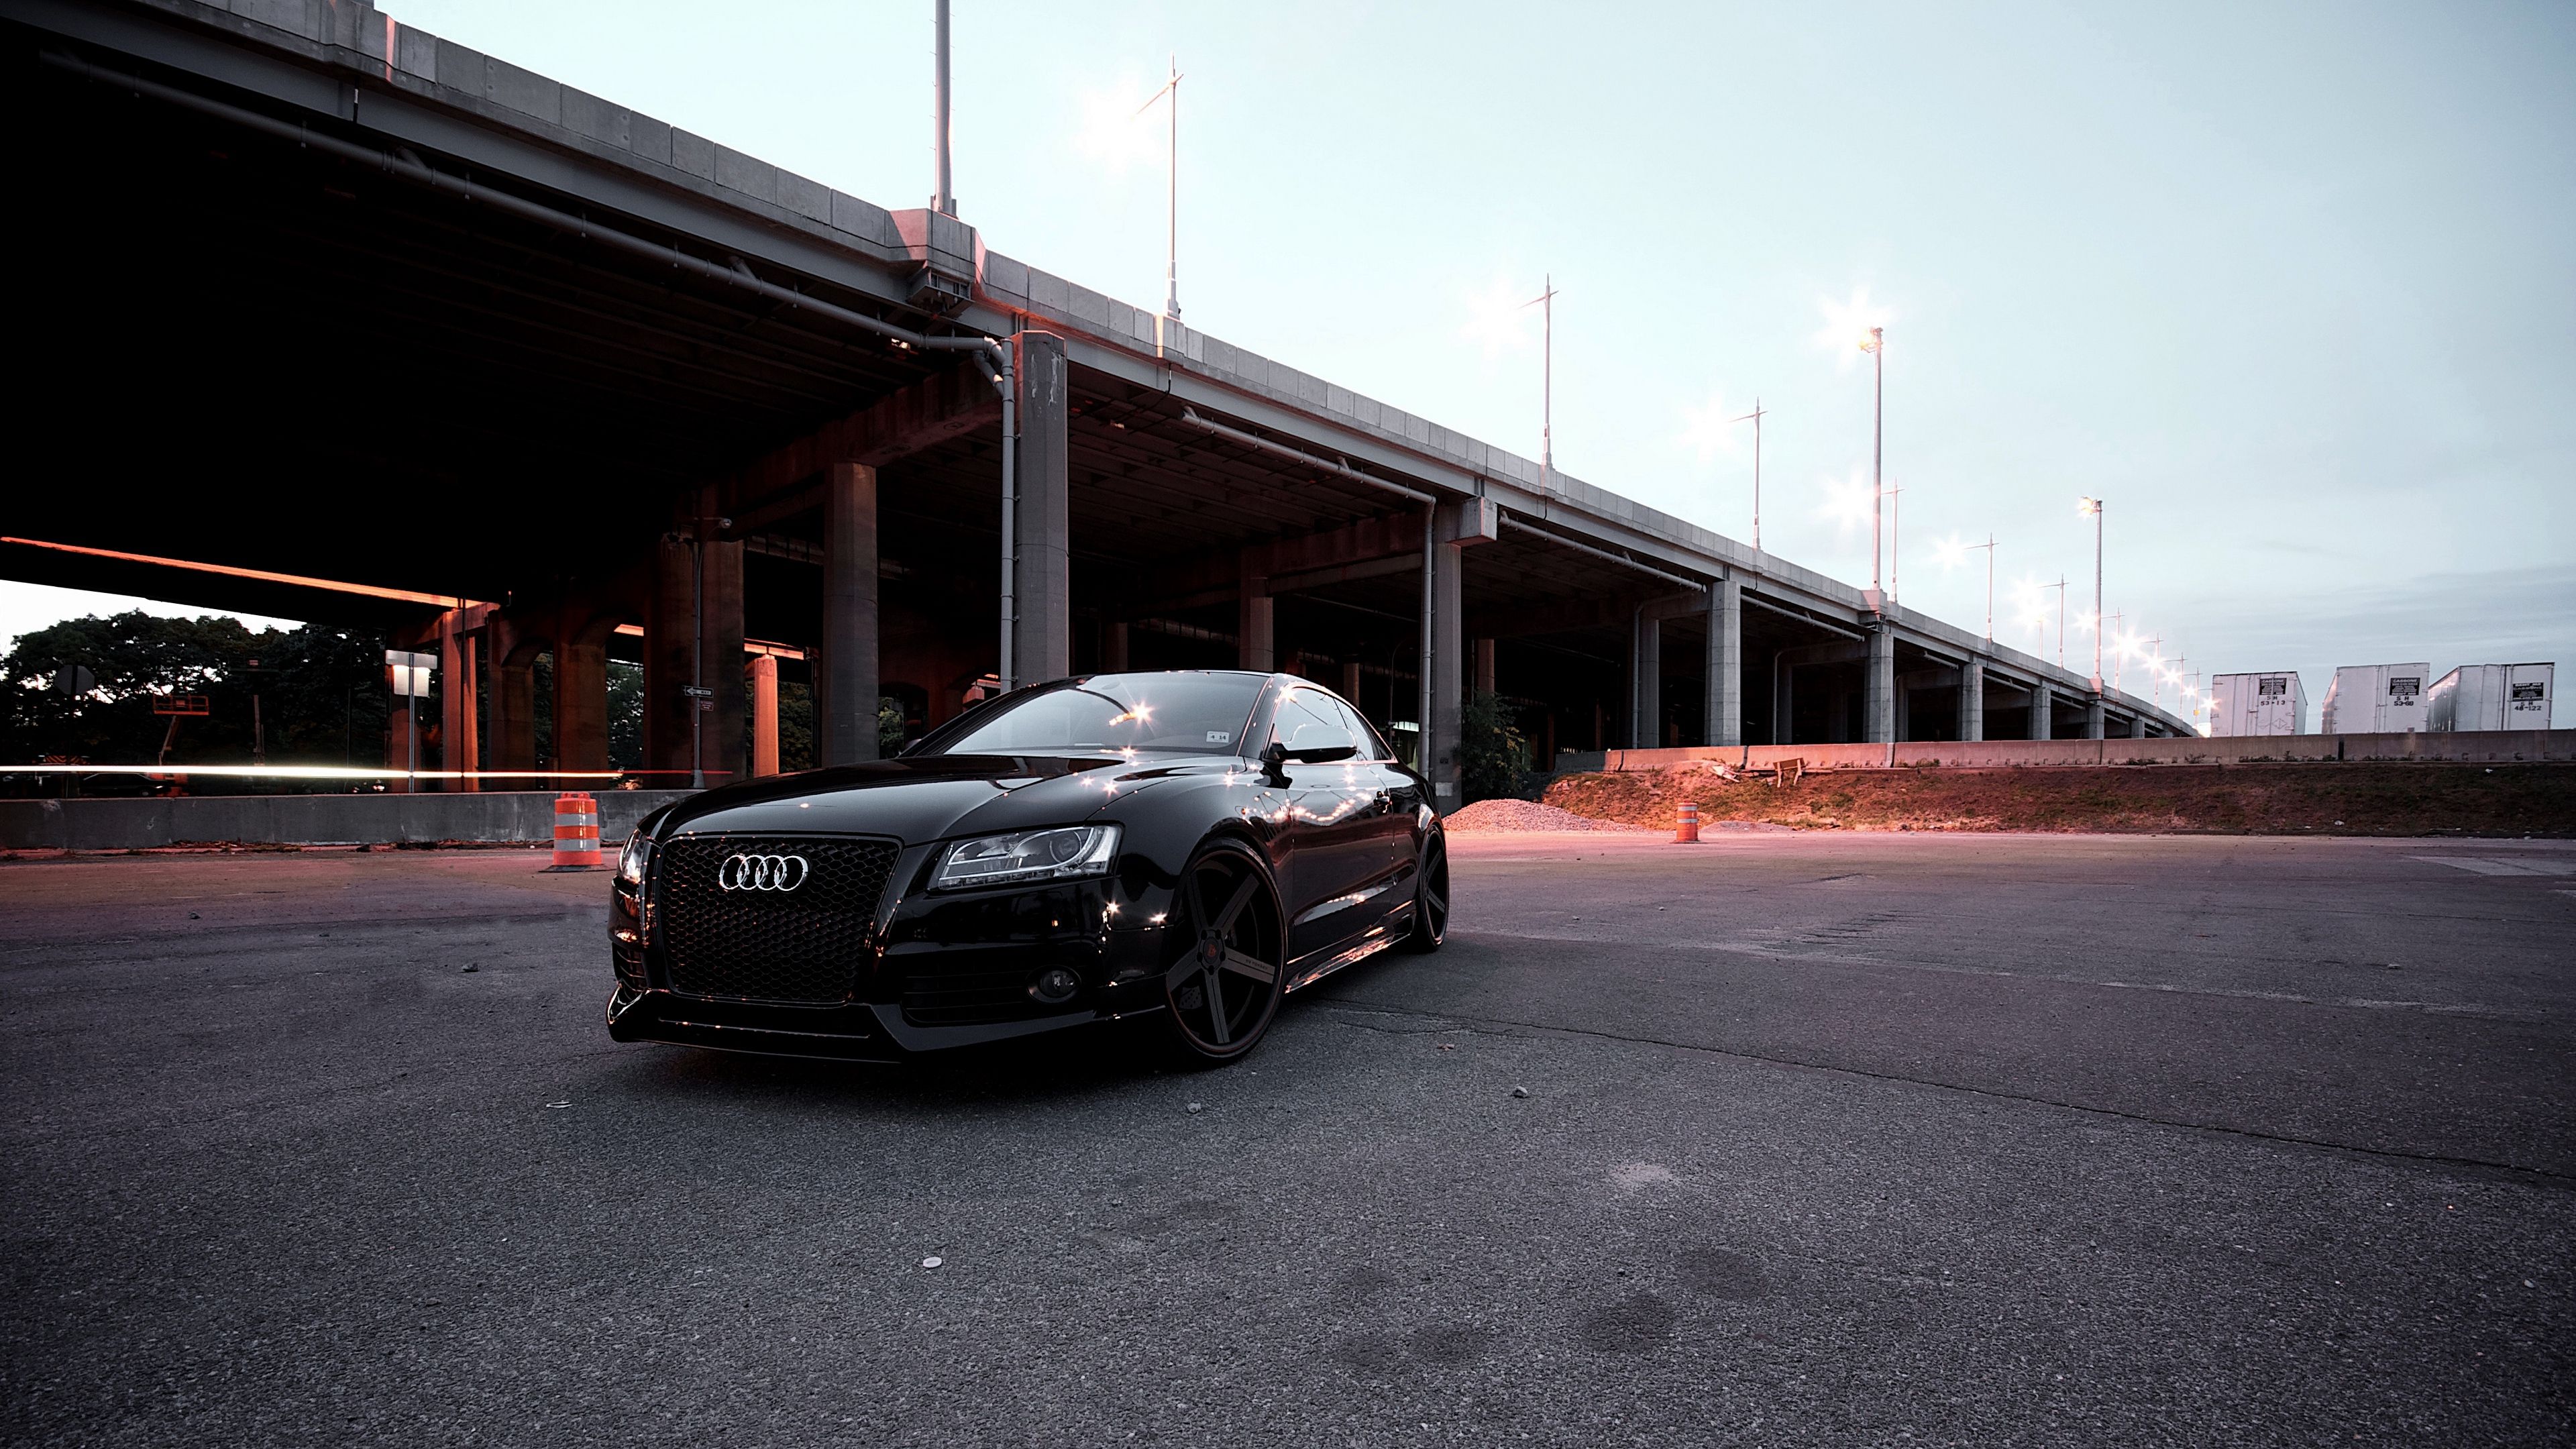 Download wallpaper 3840x2160 audi, rs tuning 4k uhd 16:9 HD background